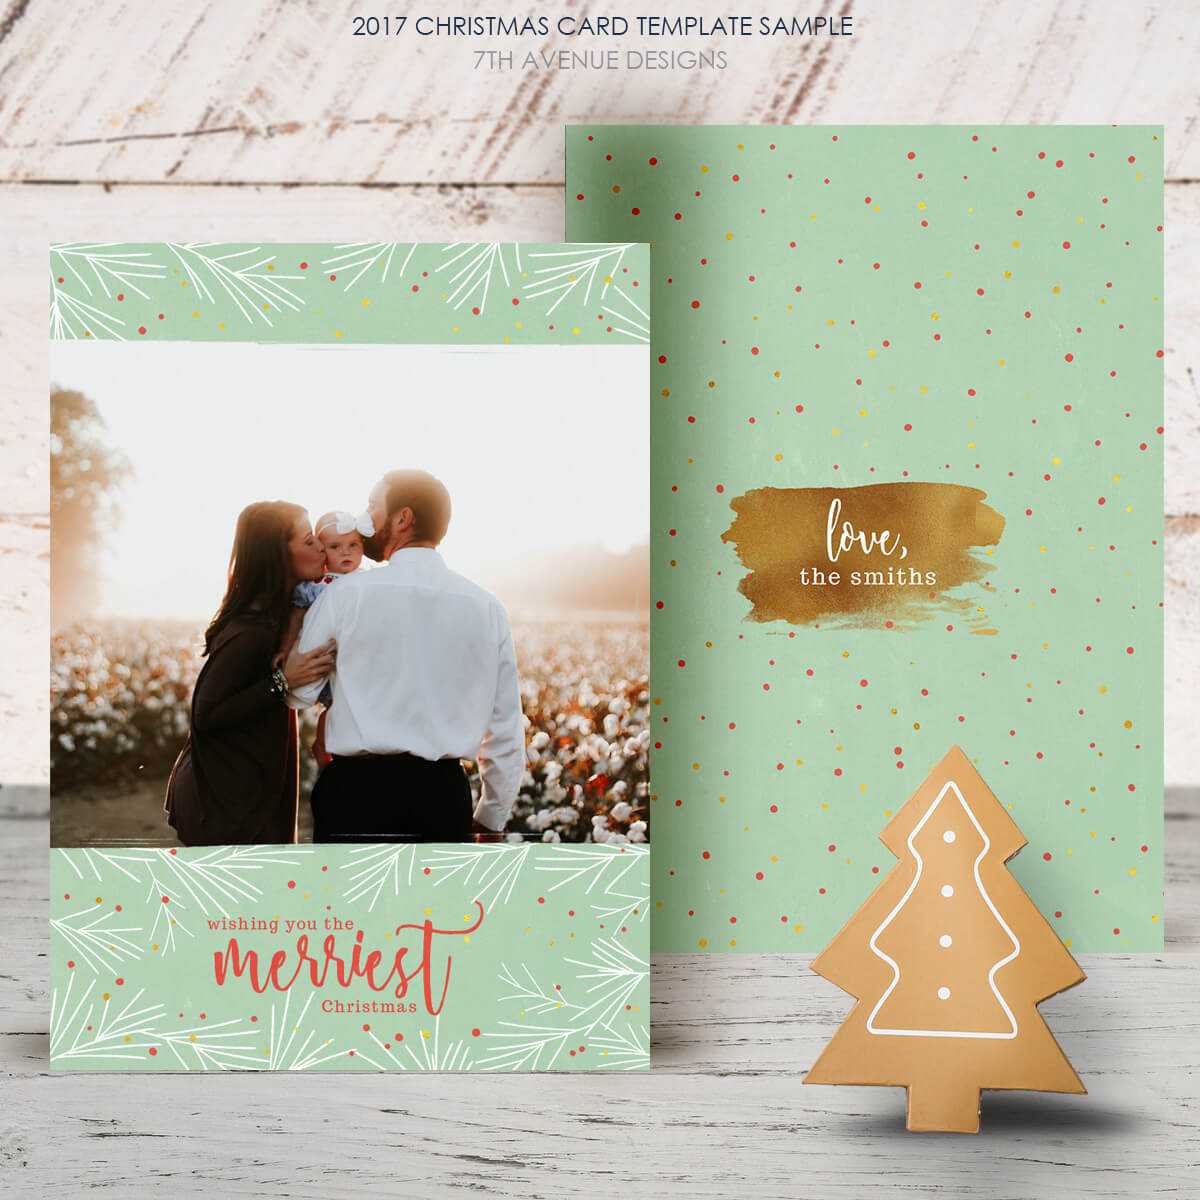 Free Christmas Card Templates For Photographers 